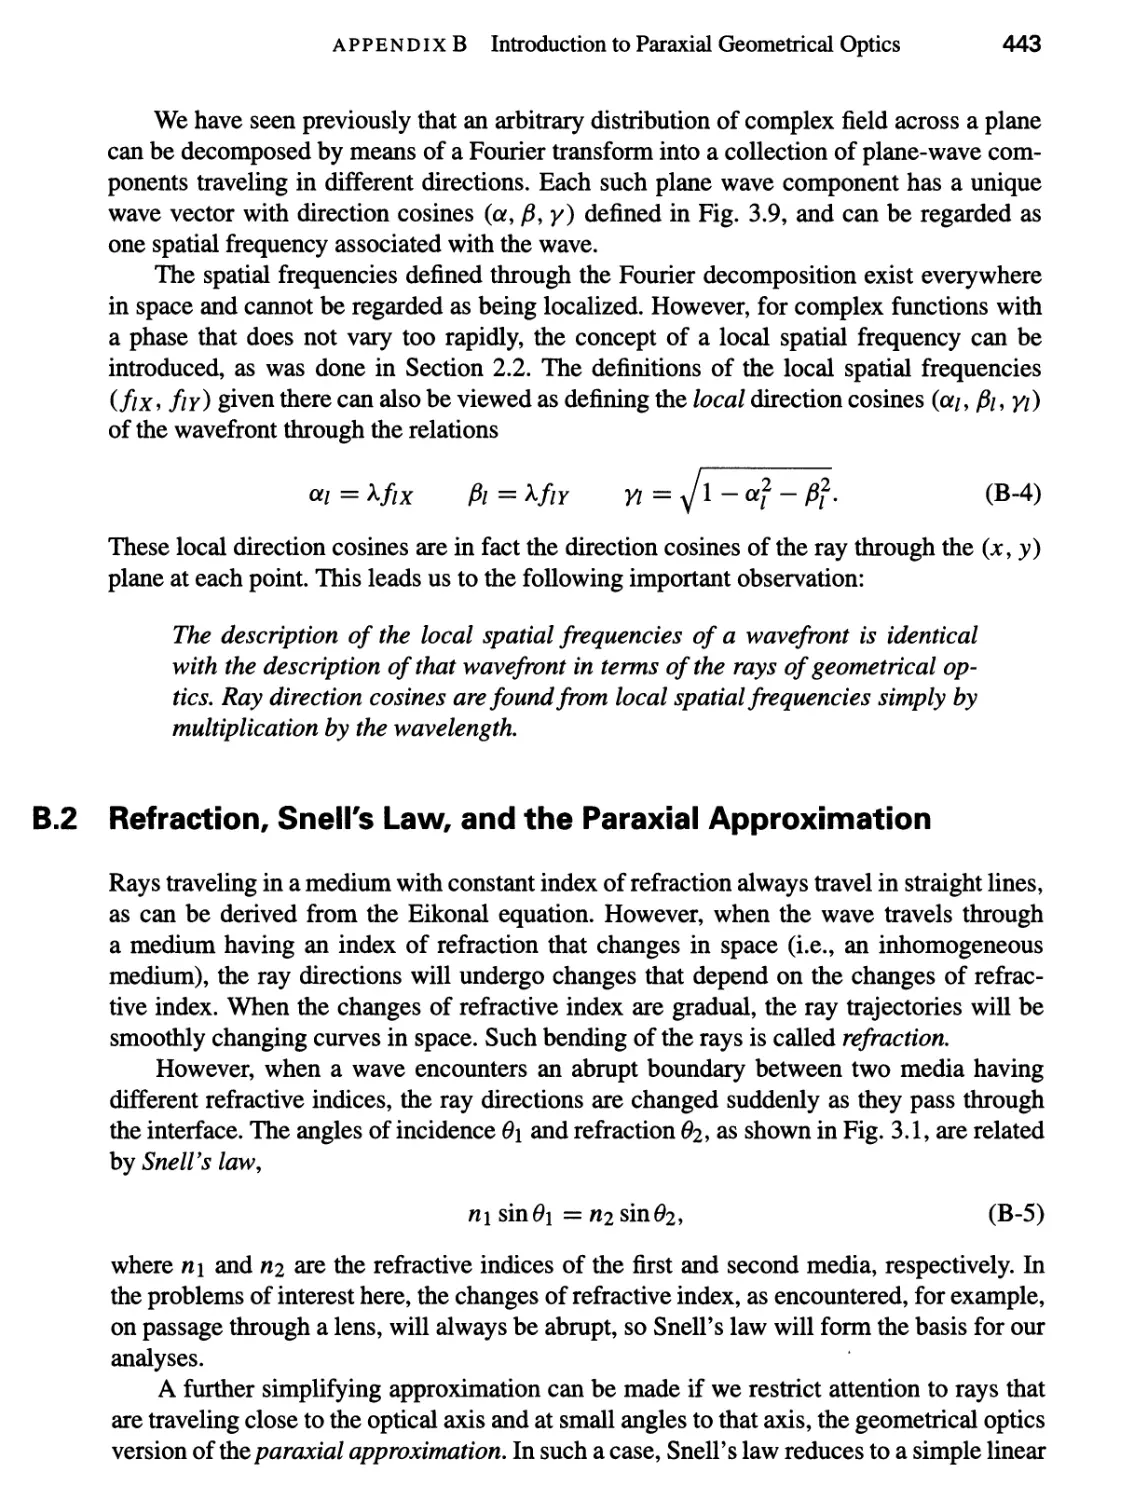 B.2 Refraction, Snell’s Law, and the Paraxial Approximation 443